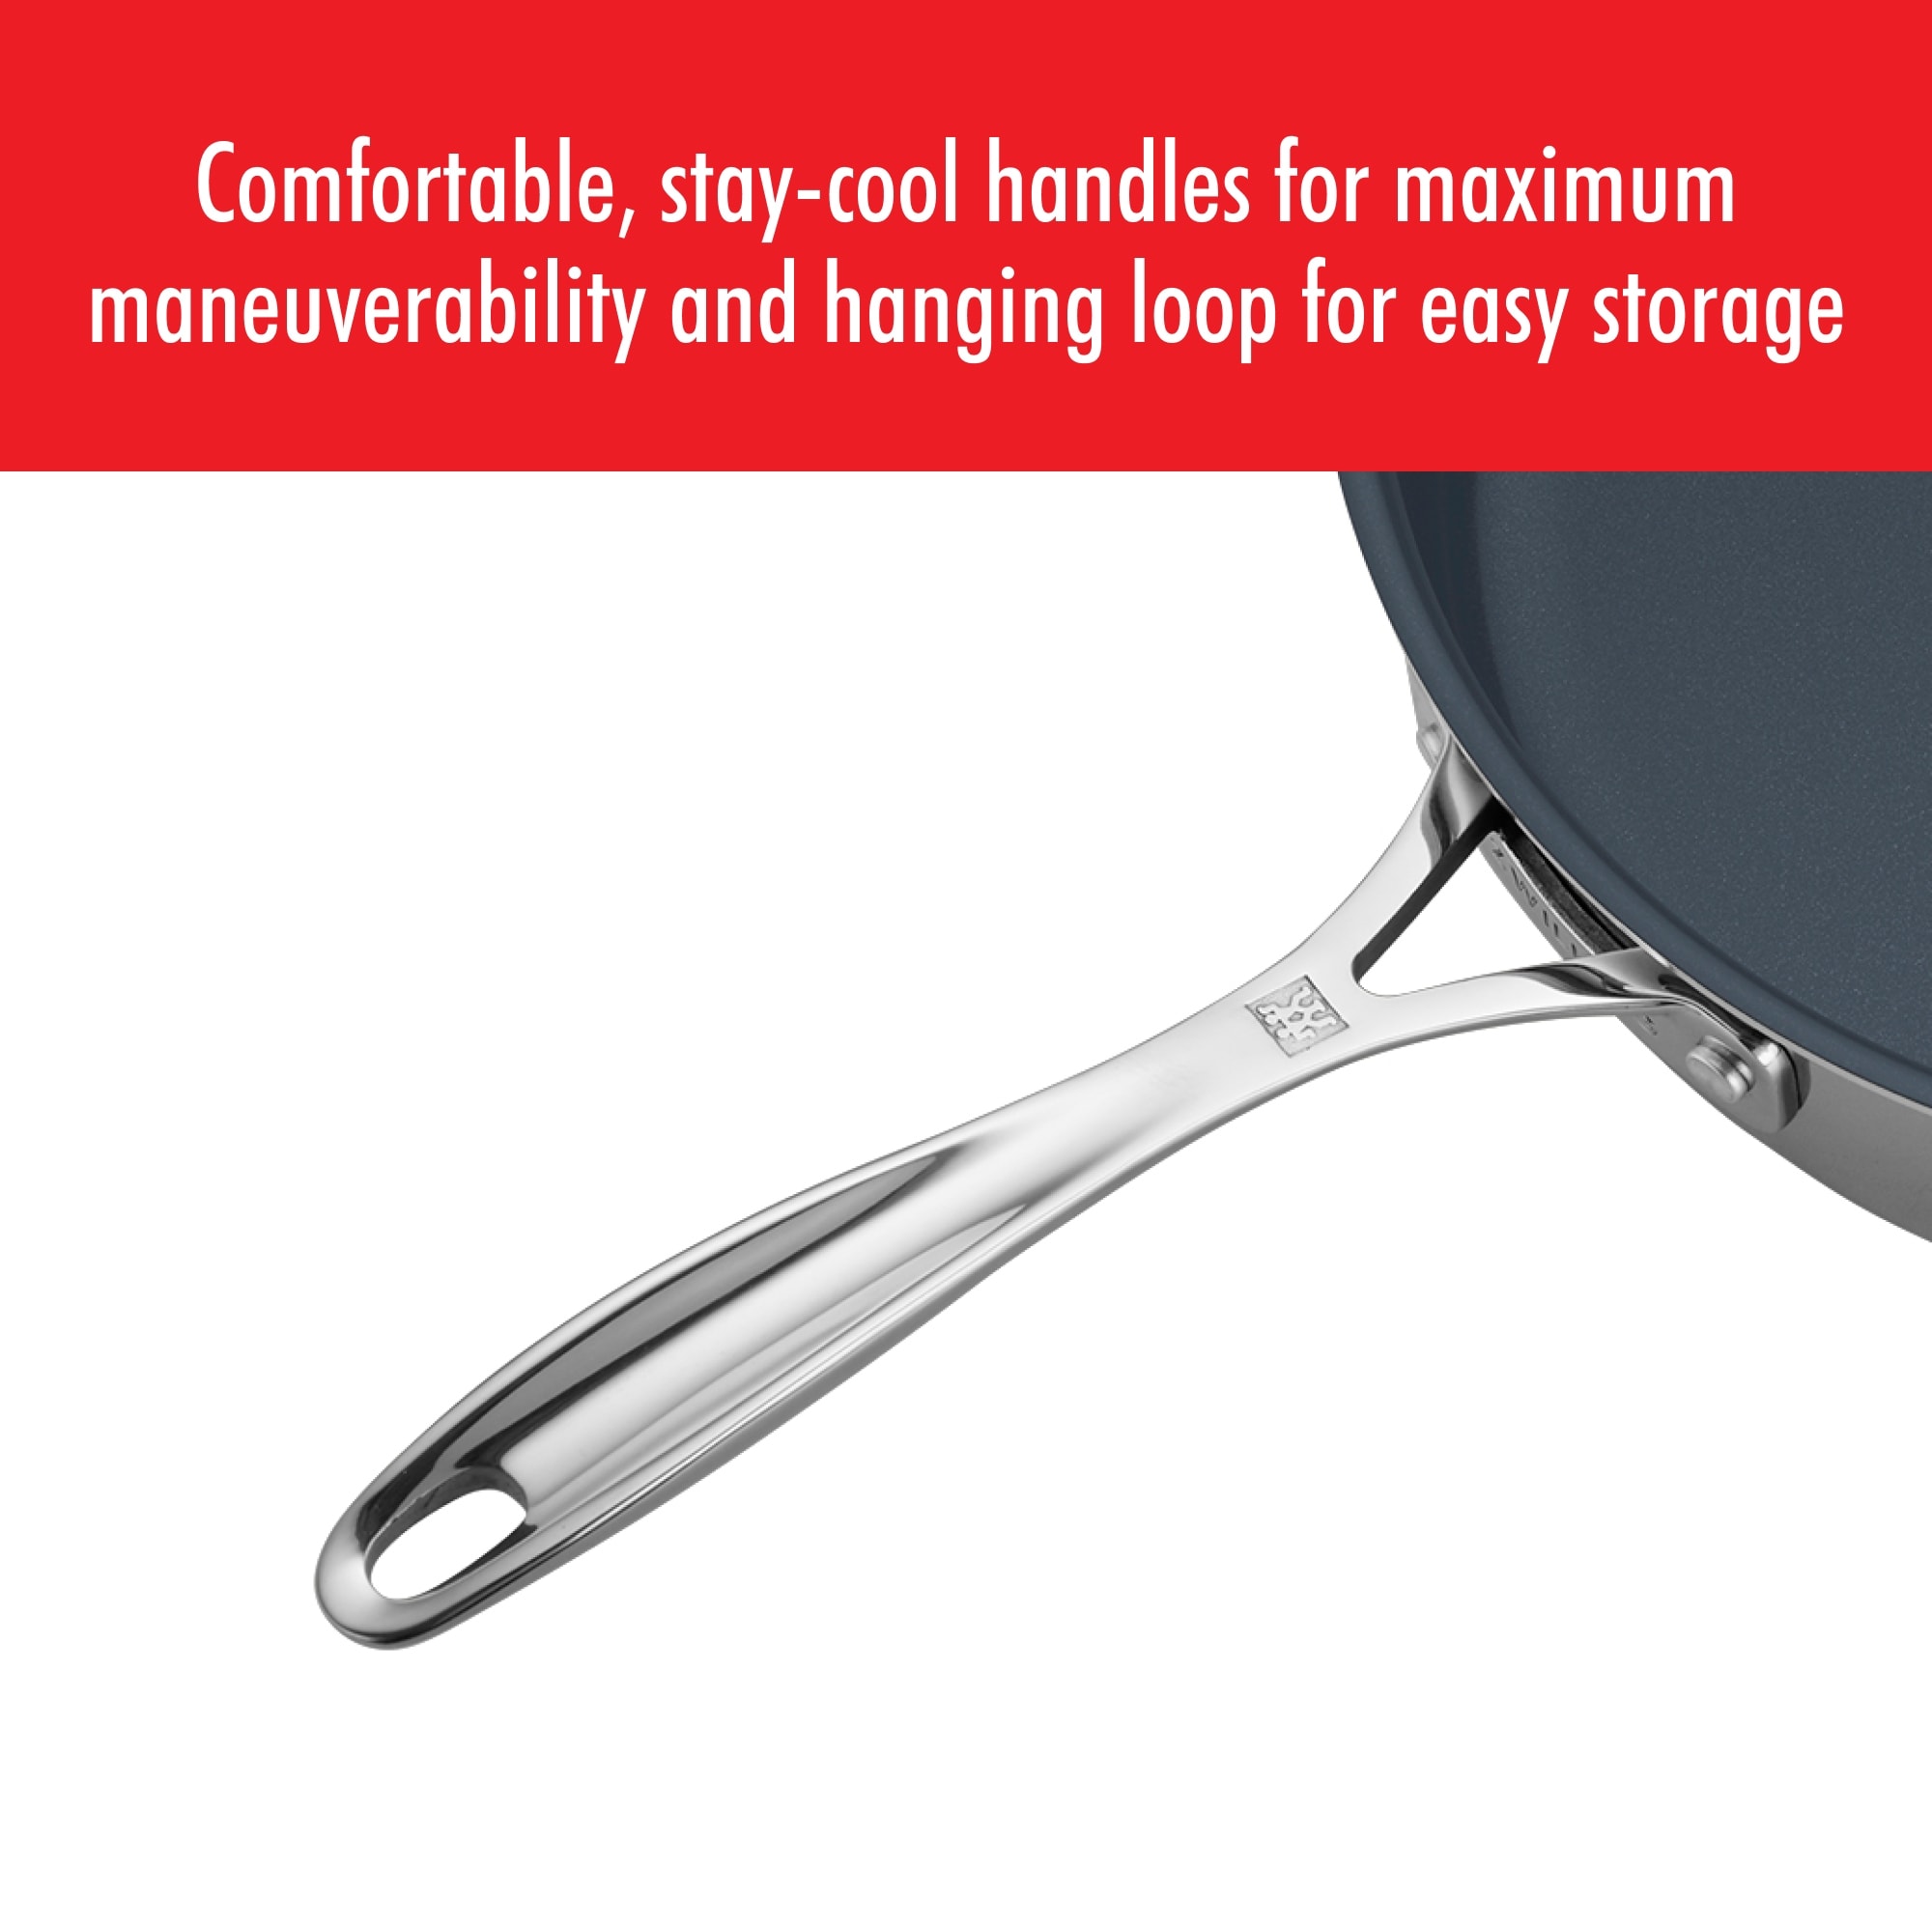 Zwilling Clad CFX 8 Stainless Steel Ceramic Nonstick Fry Pan